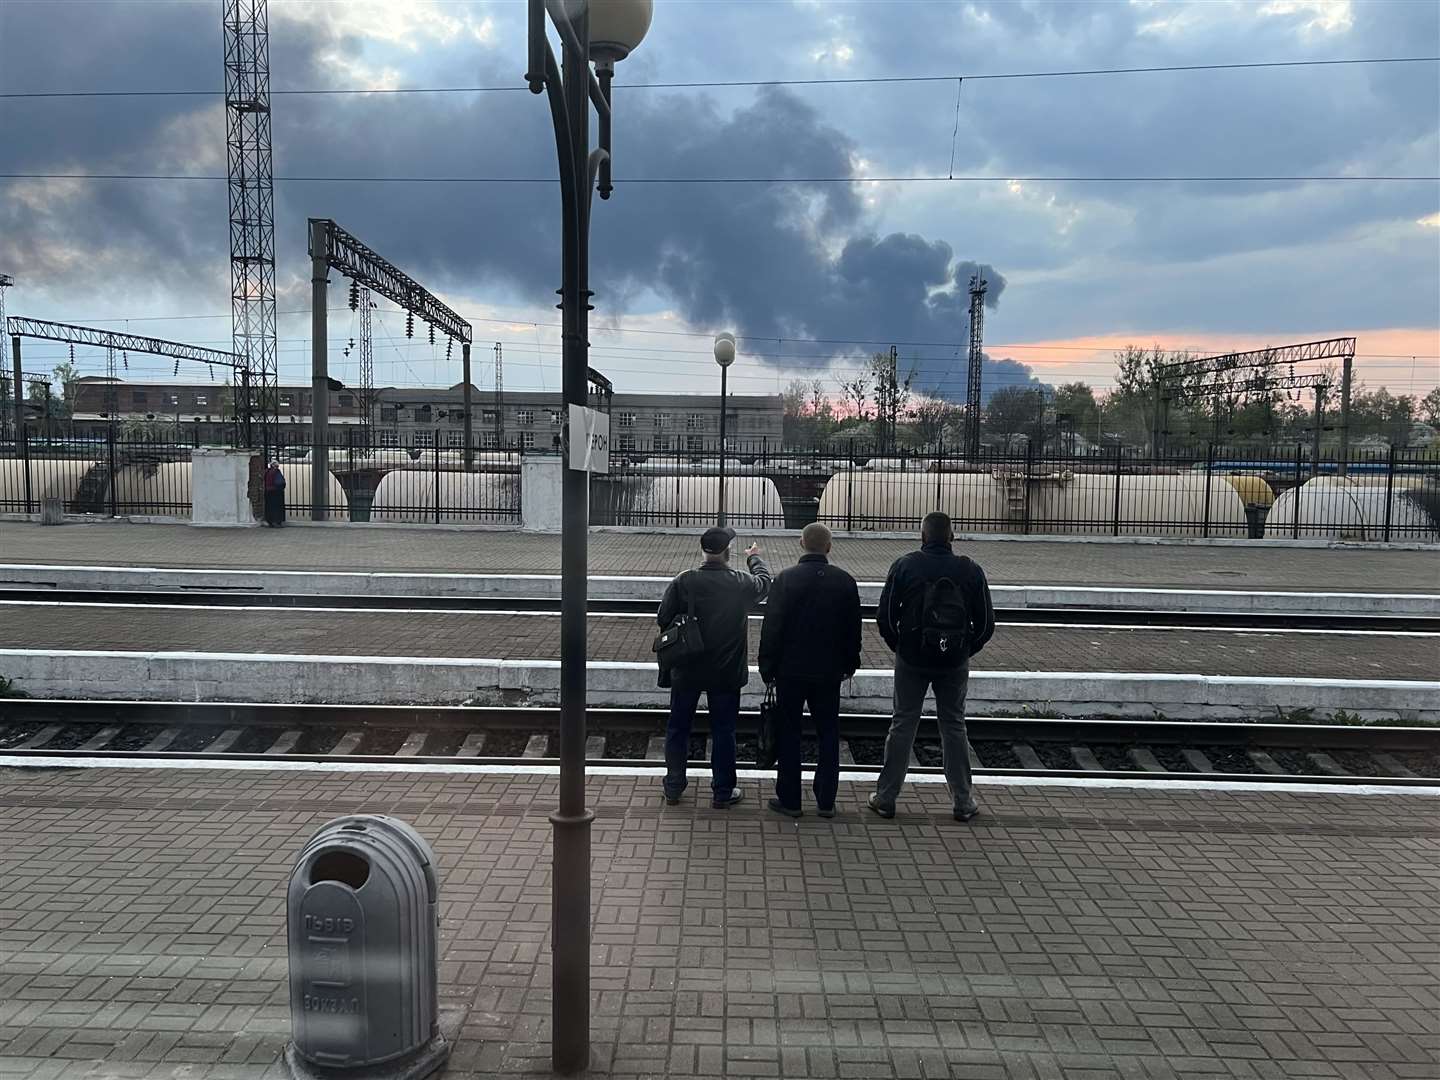 Passengers observe the smoke rising from a rocket attack in Lviv in Ukraine.